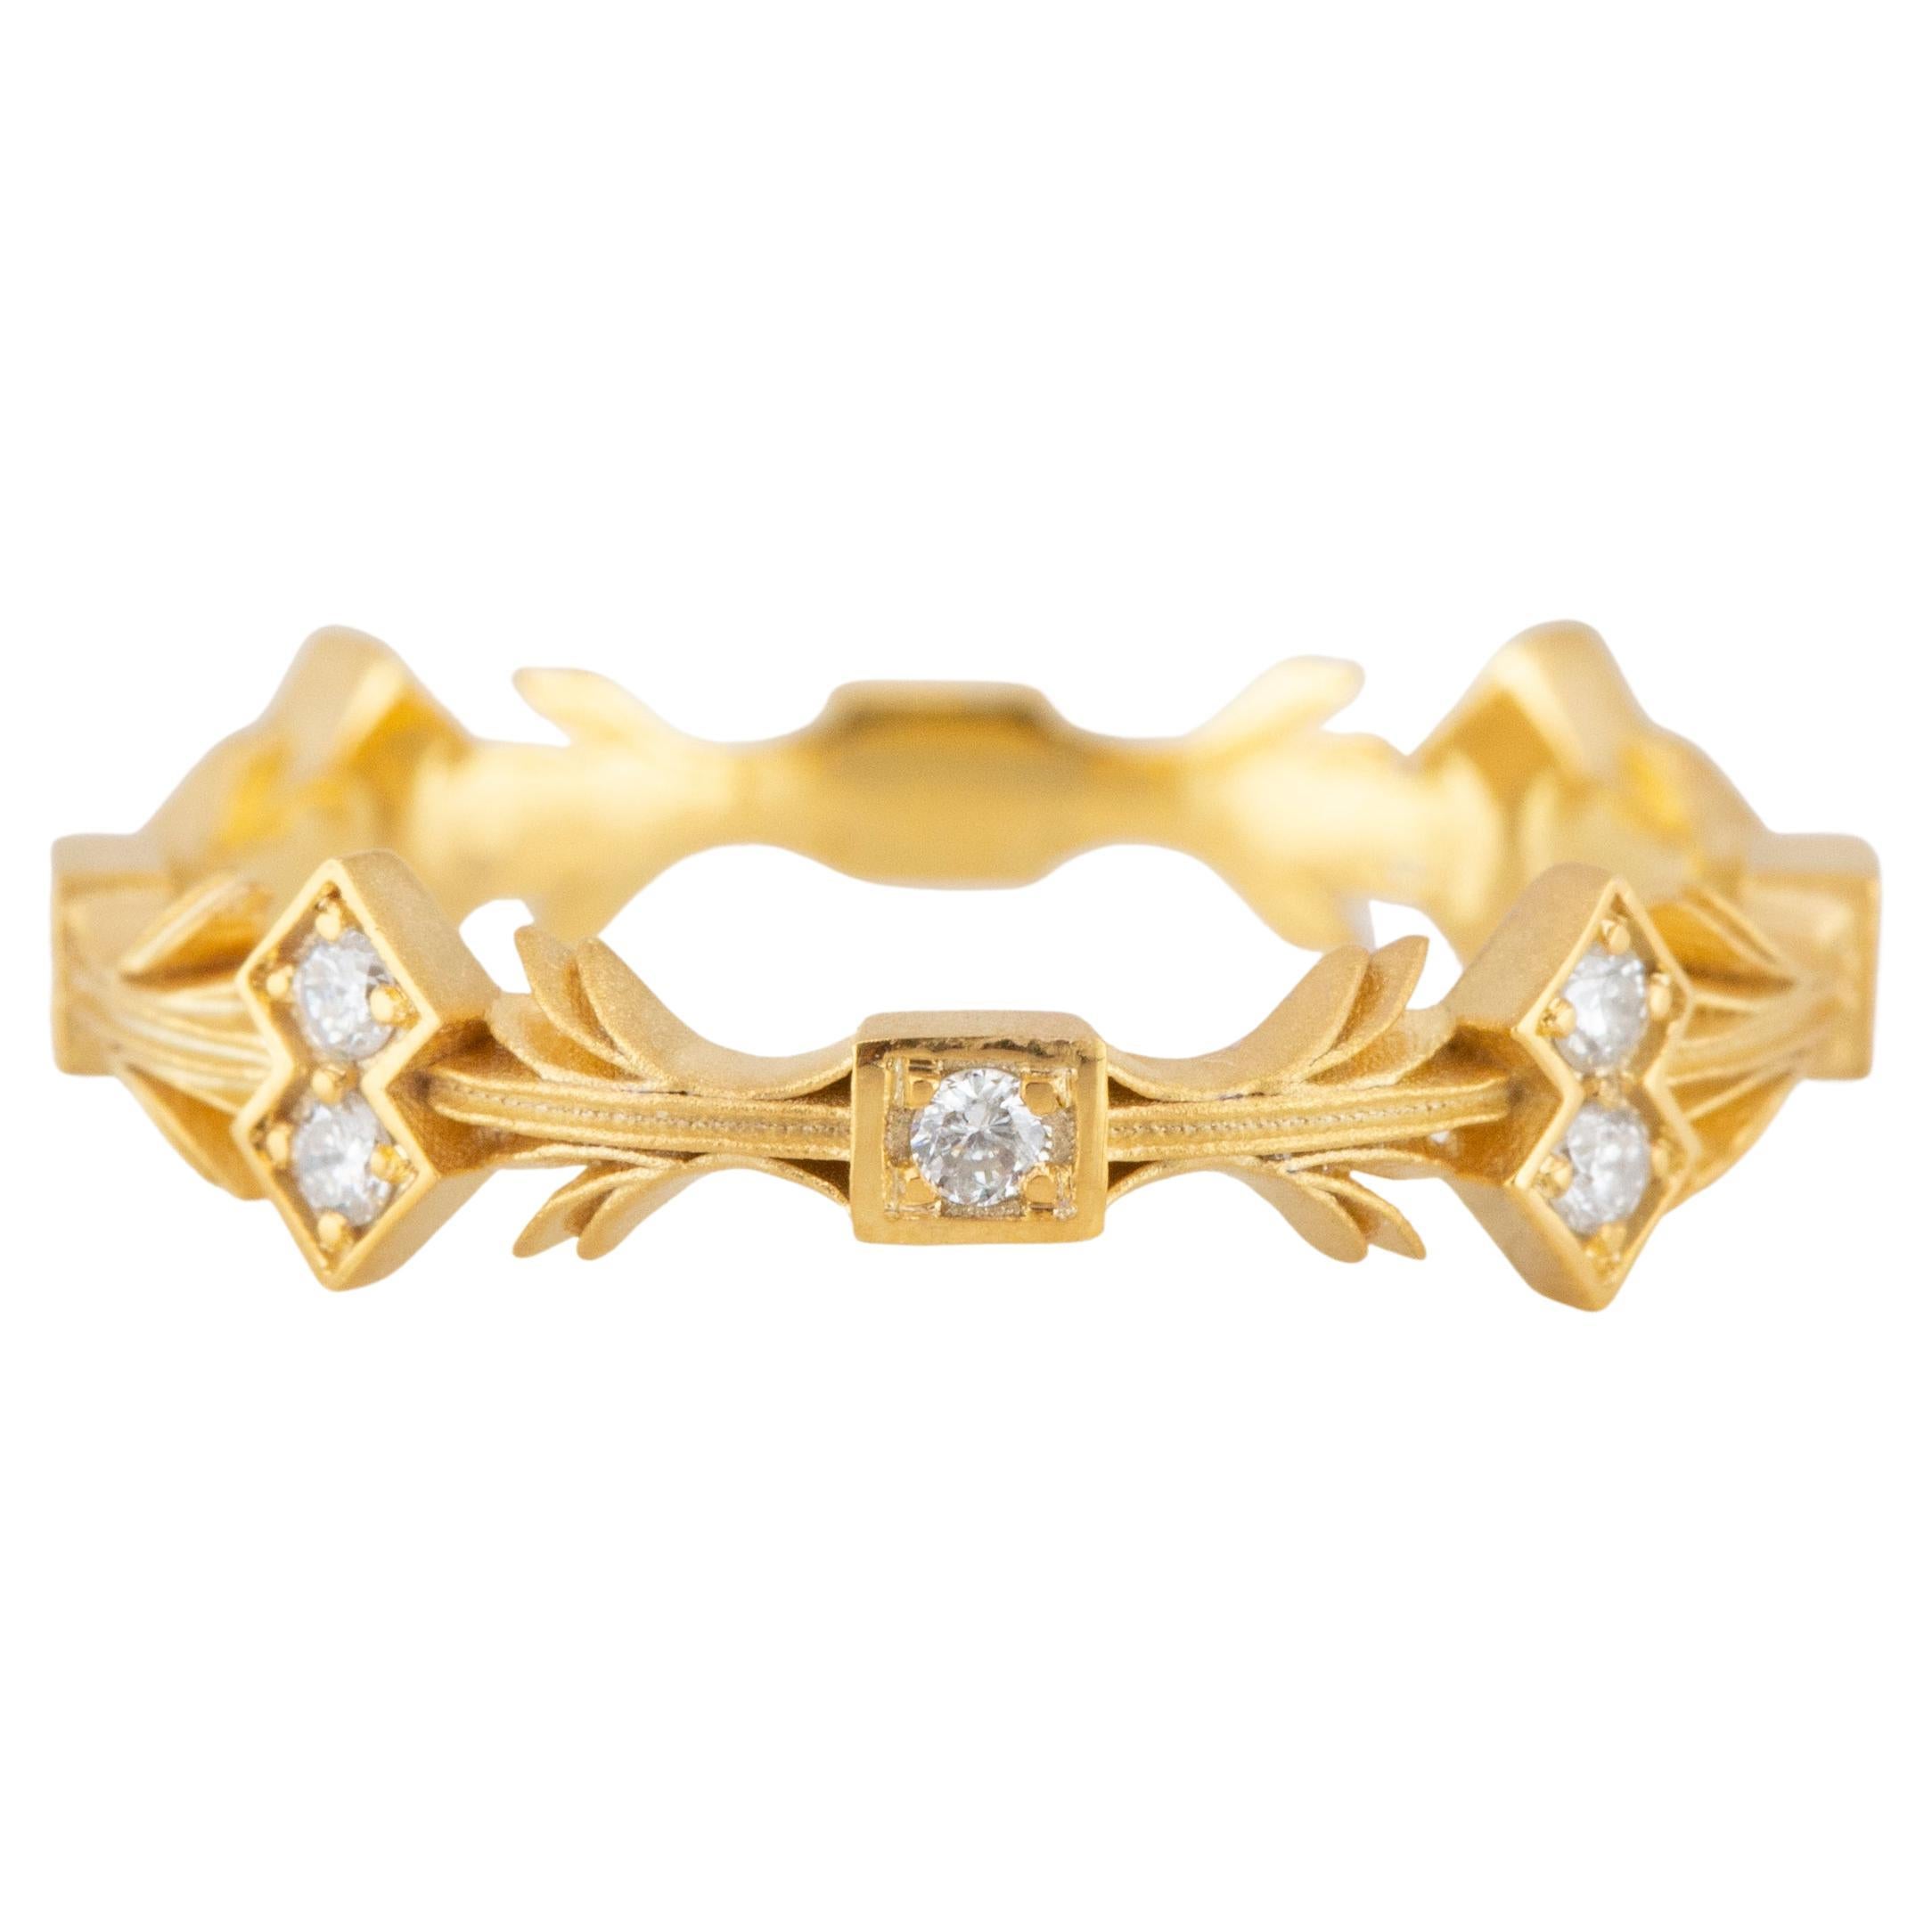 For Sale:  Mabelle Ring, 14K Gold 0.08 Ct. Diamond Vintage Style Wedding Band Ring